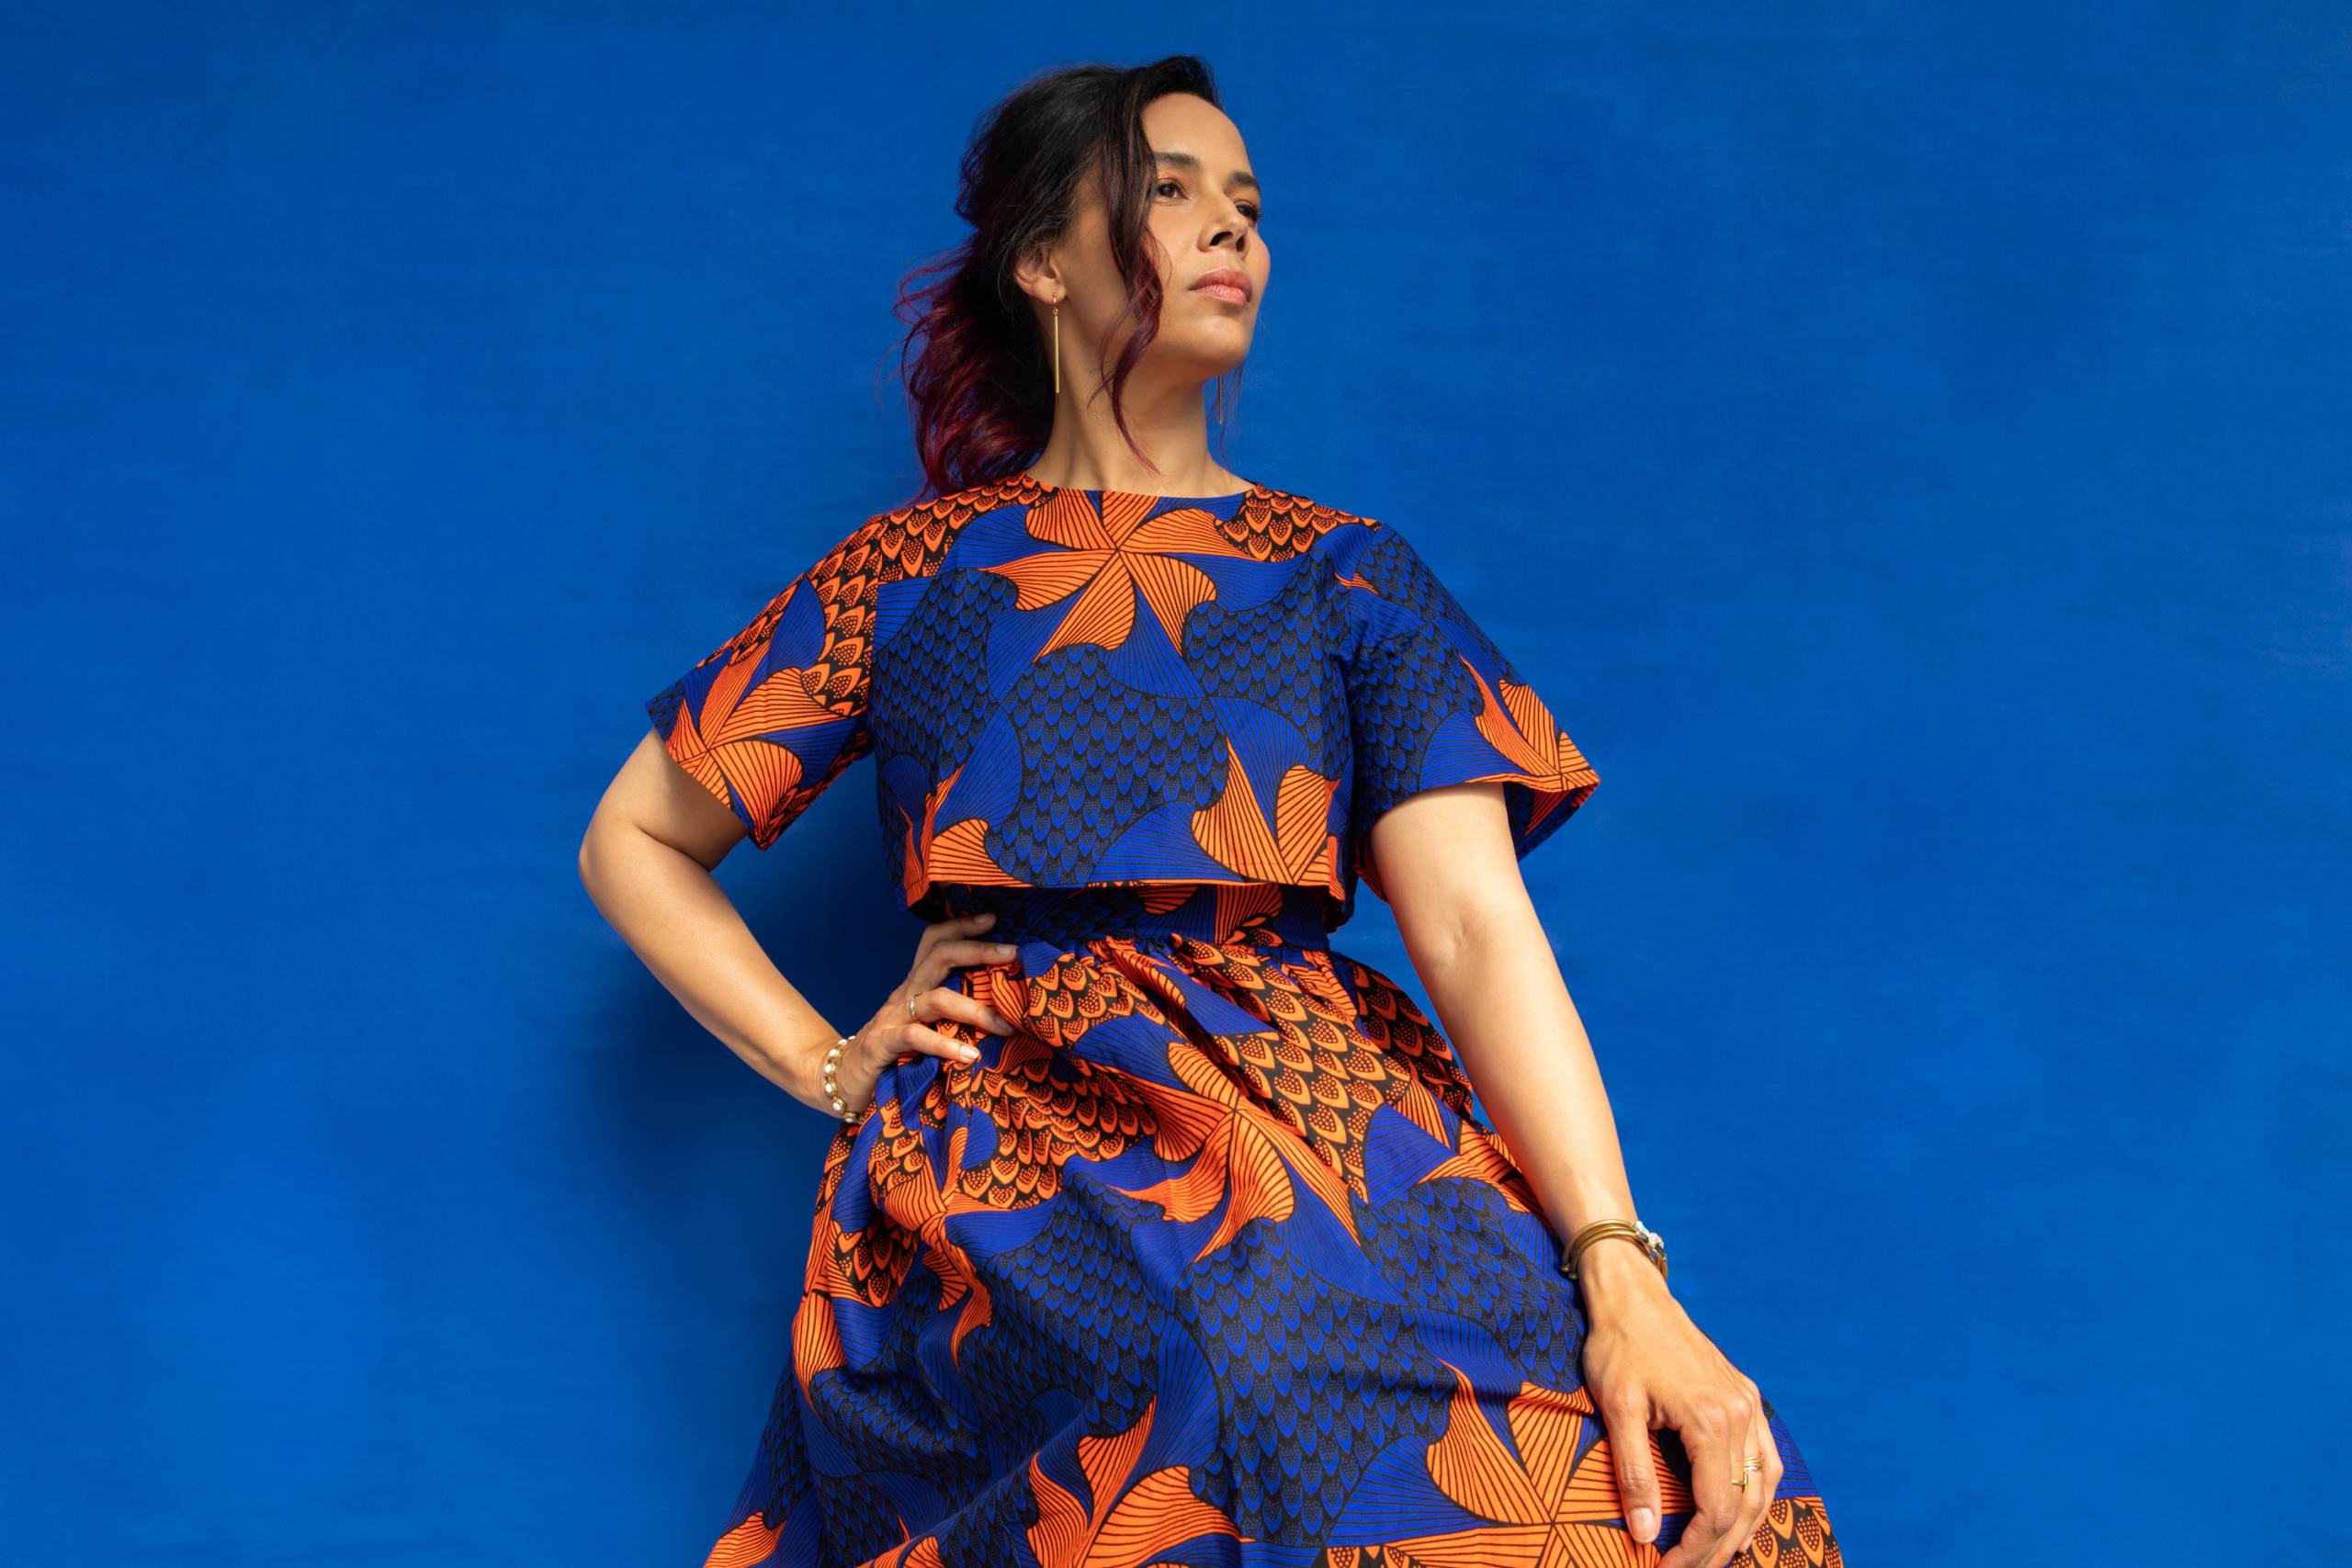 a woman with light brown skin and dark brown hair poses in a blue and orange dress against a blue backdrop